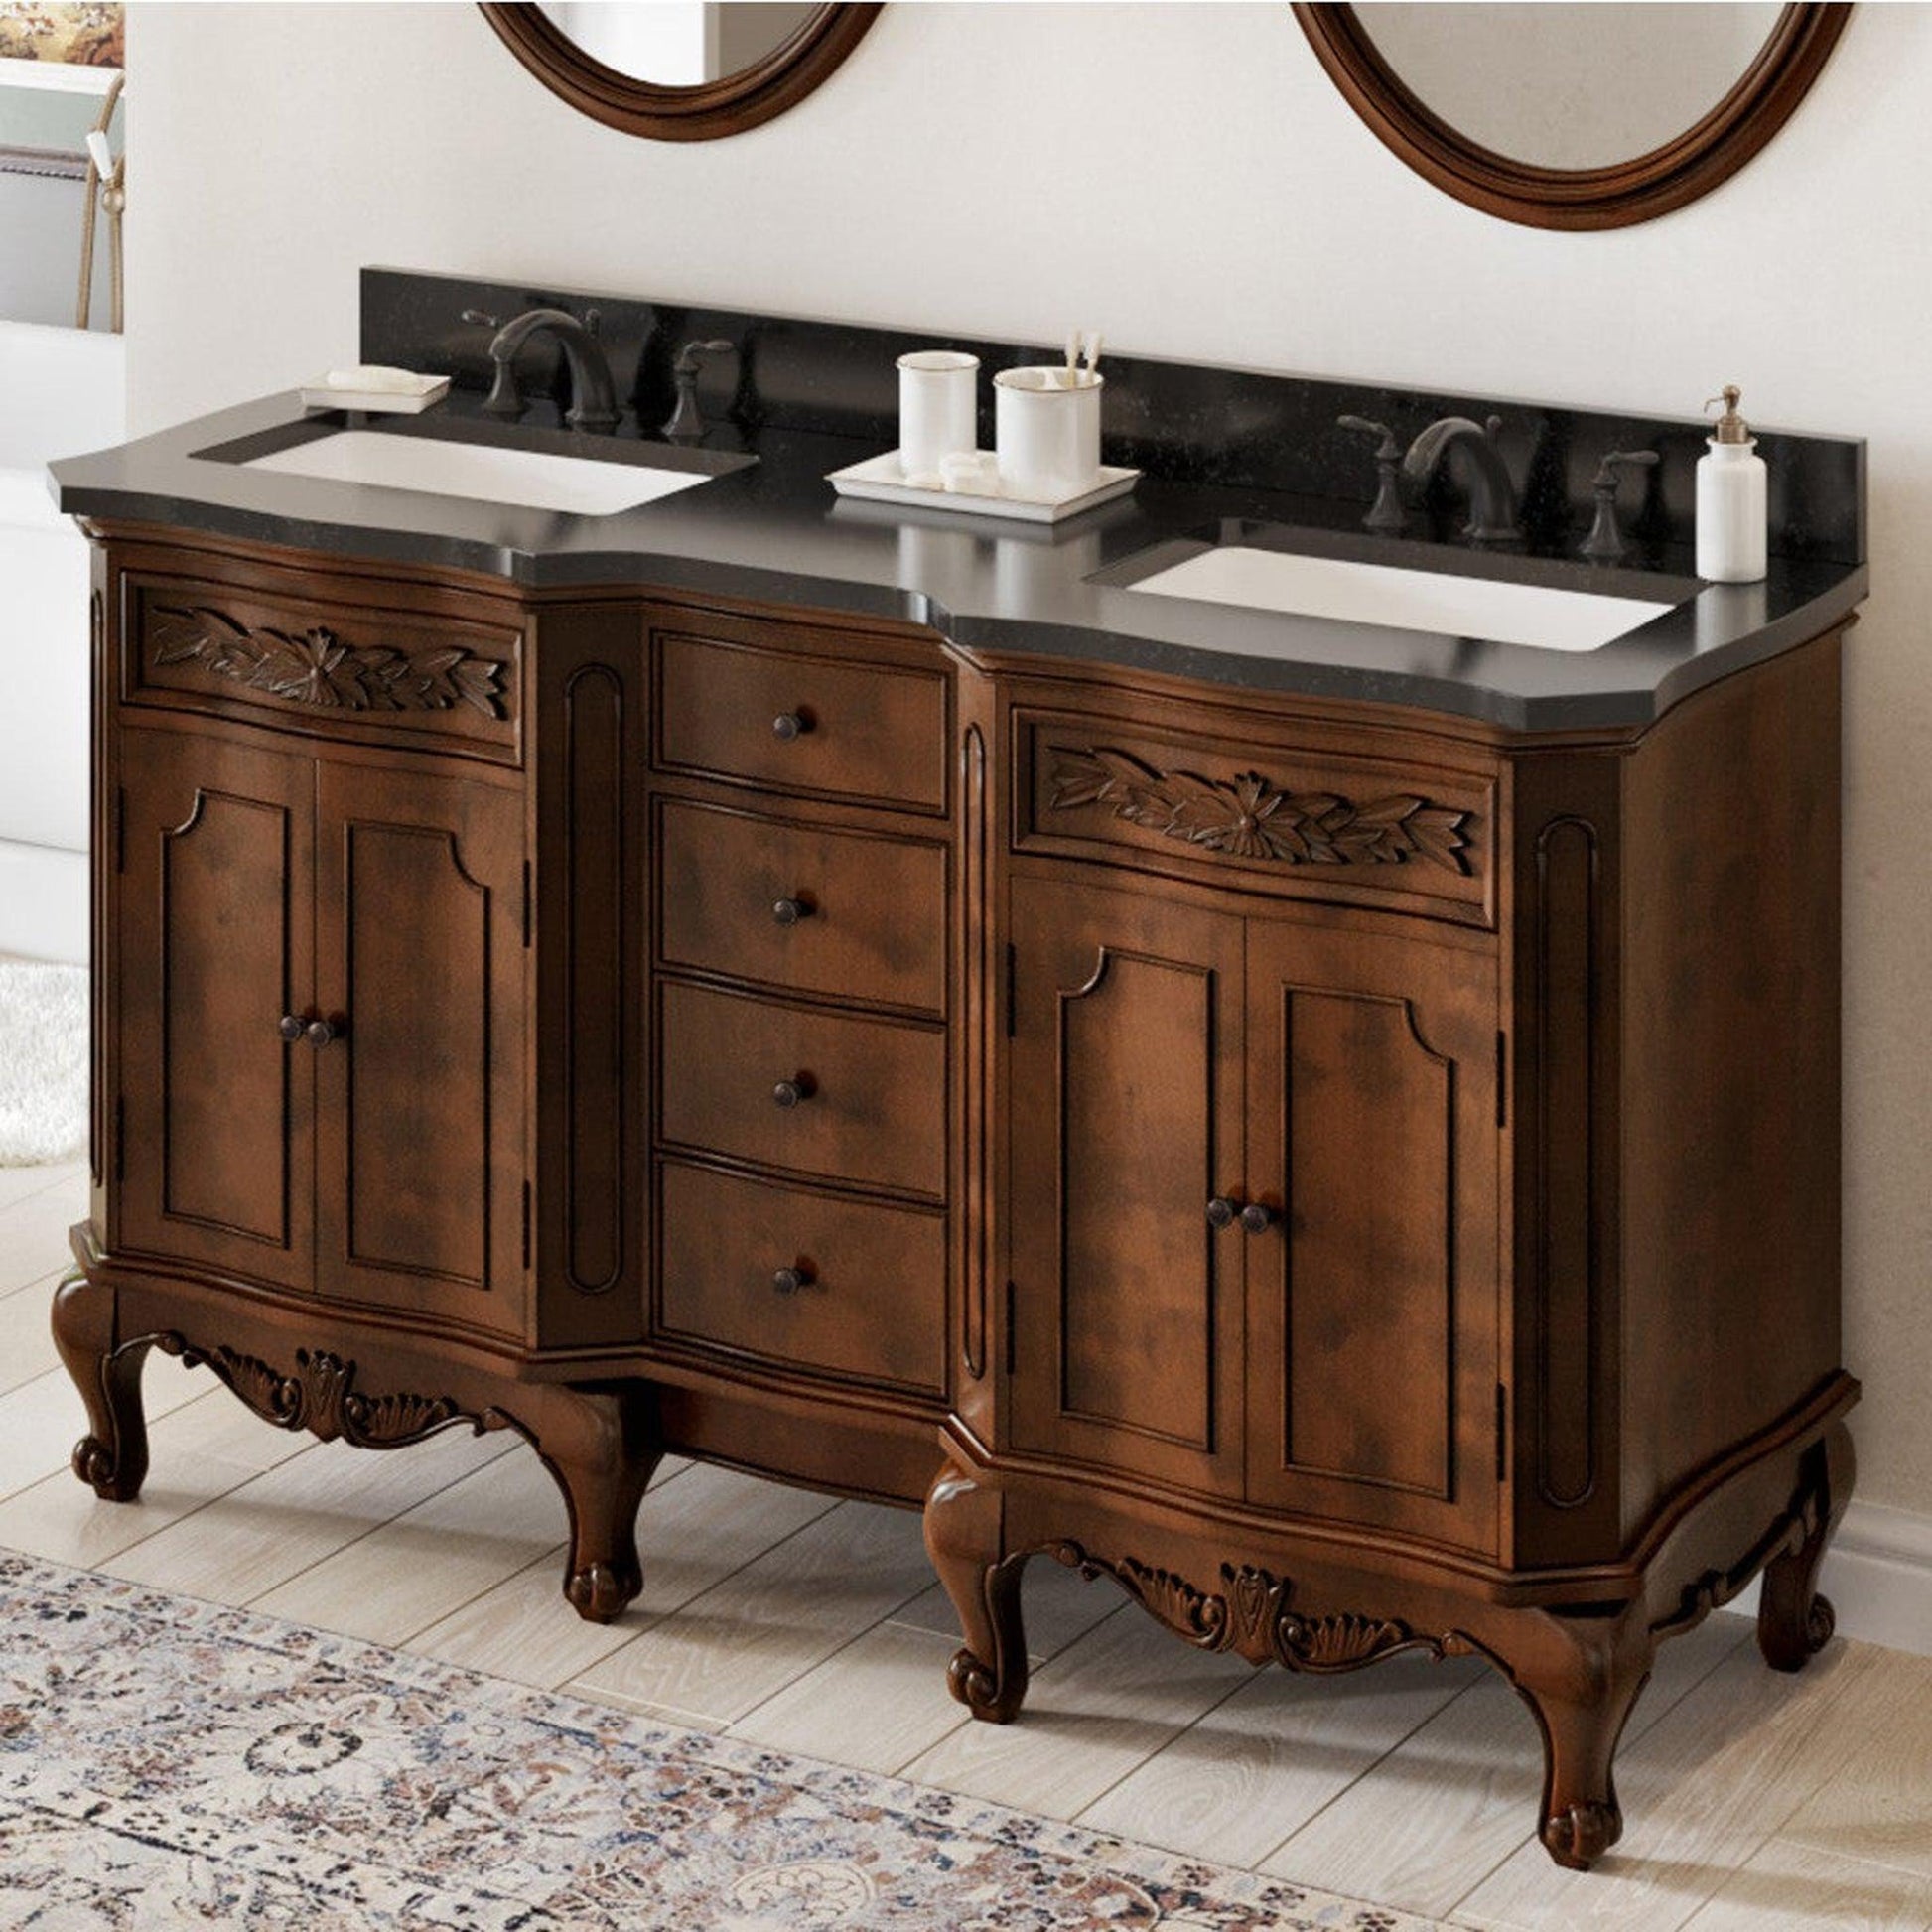 Hardware Resources Jeffrey Alexander Silver Label Clairemont 60" Nutmeg Freestanding Vanity With Double Bowl, Clairemont-Only Black Granite Vanity Top, Backsplash and Rectangle Undermount Sink